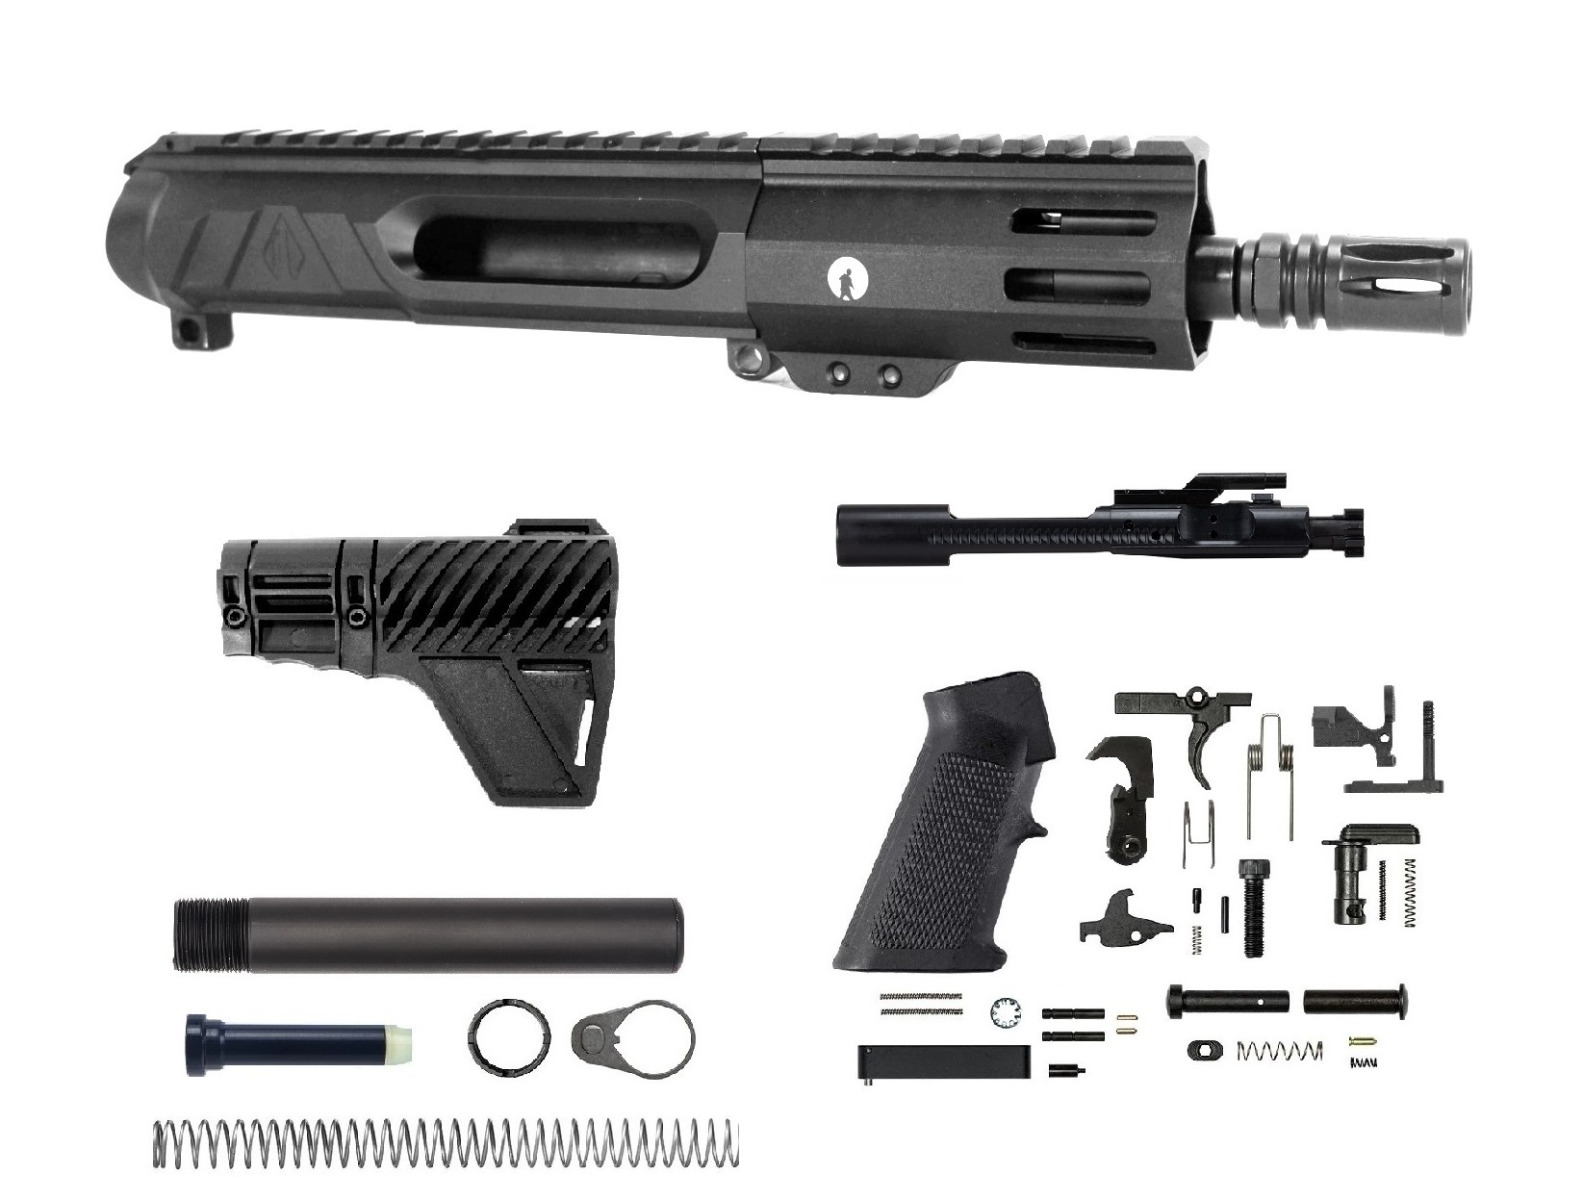 5 inch AR-15 NR Side Charging 300 Blackout Melonite M-LOK Upper Kit Suppressor Ready | Pro2a Tactical